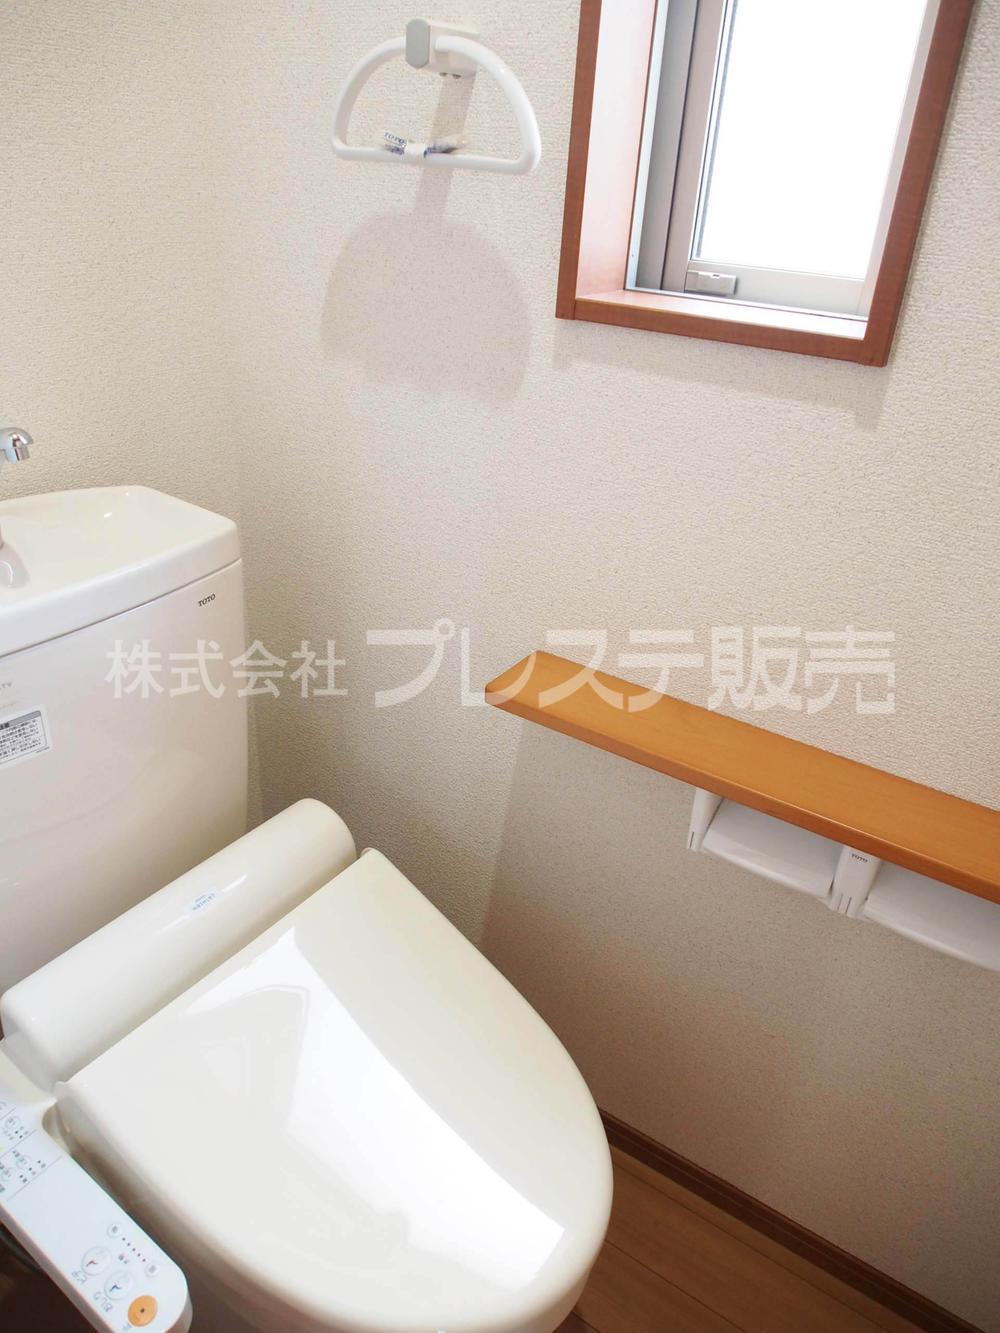 Same specifications photos (Other introspection). Standard equipped with a bidet! 